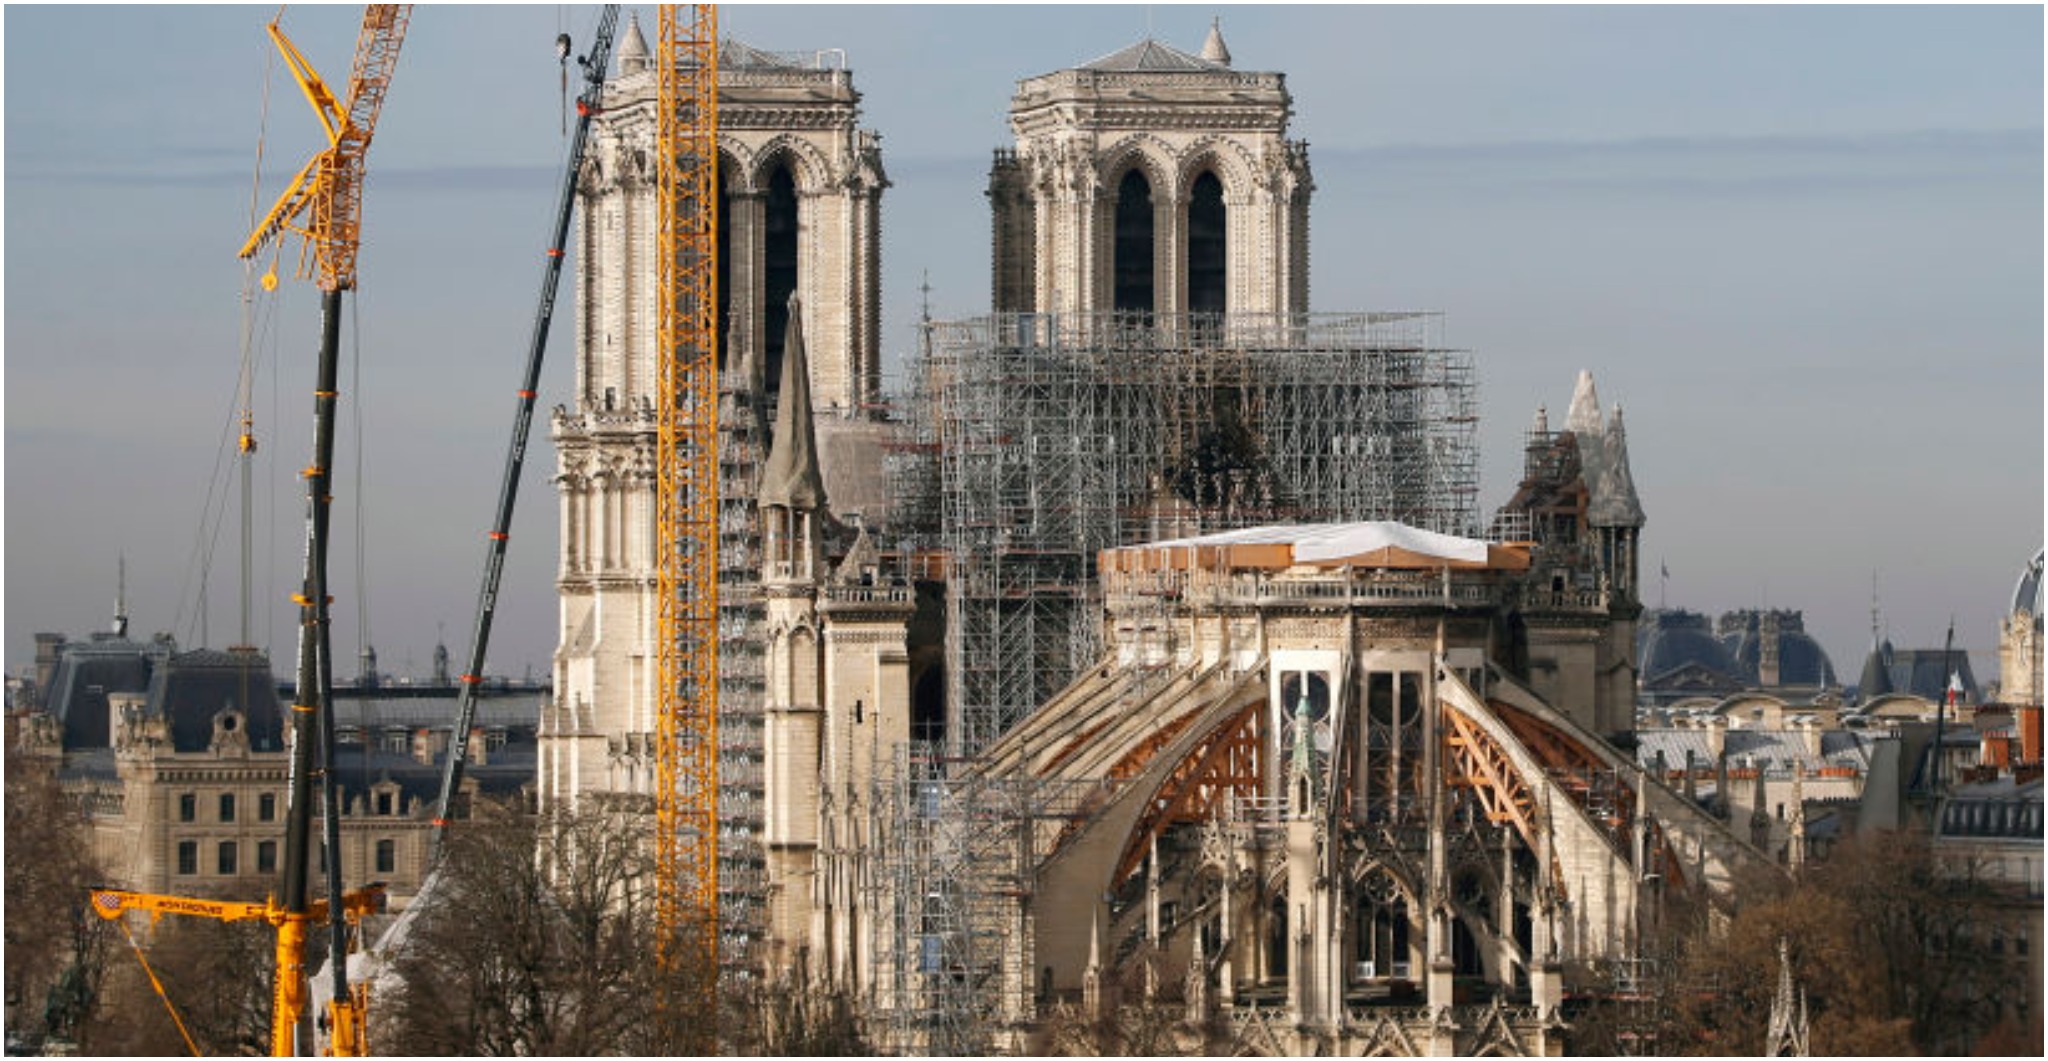 50% Chance Notre Dame Cannot be Saved says Cathedral Representative